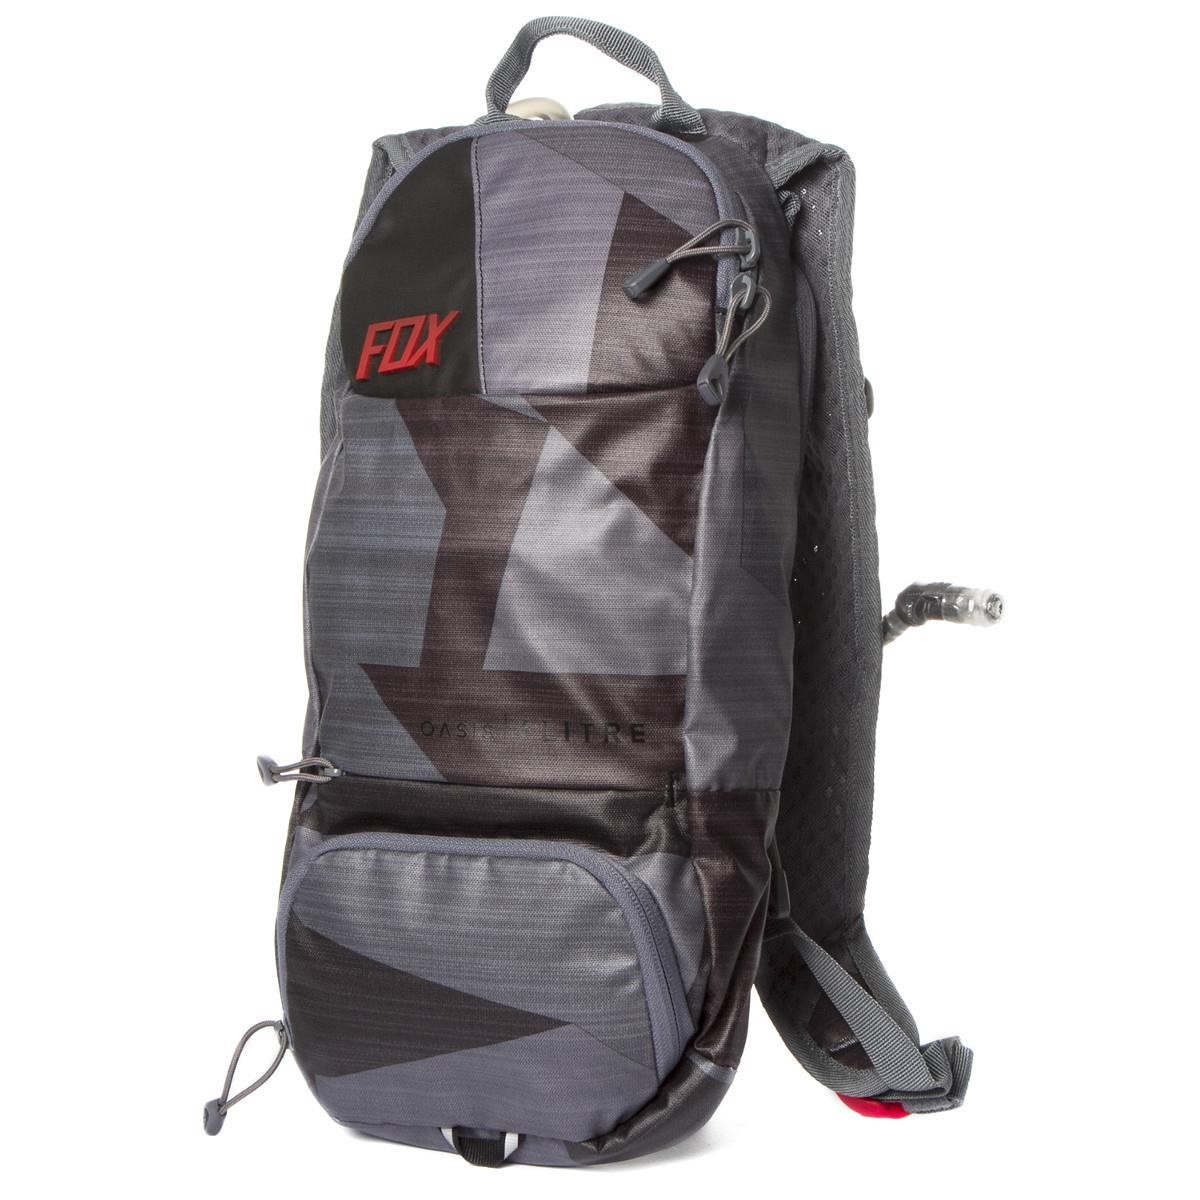 Fox Backpack with Hydration System Compartment Oasis Camo